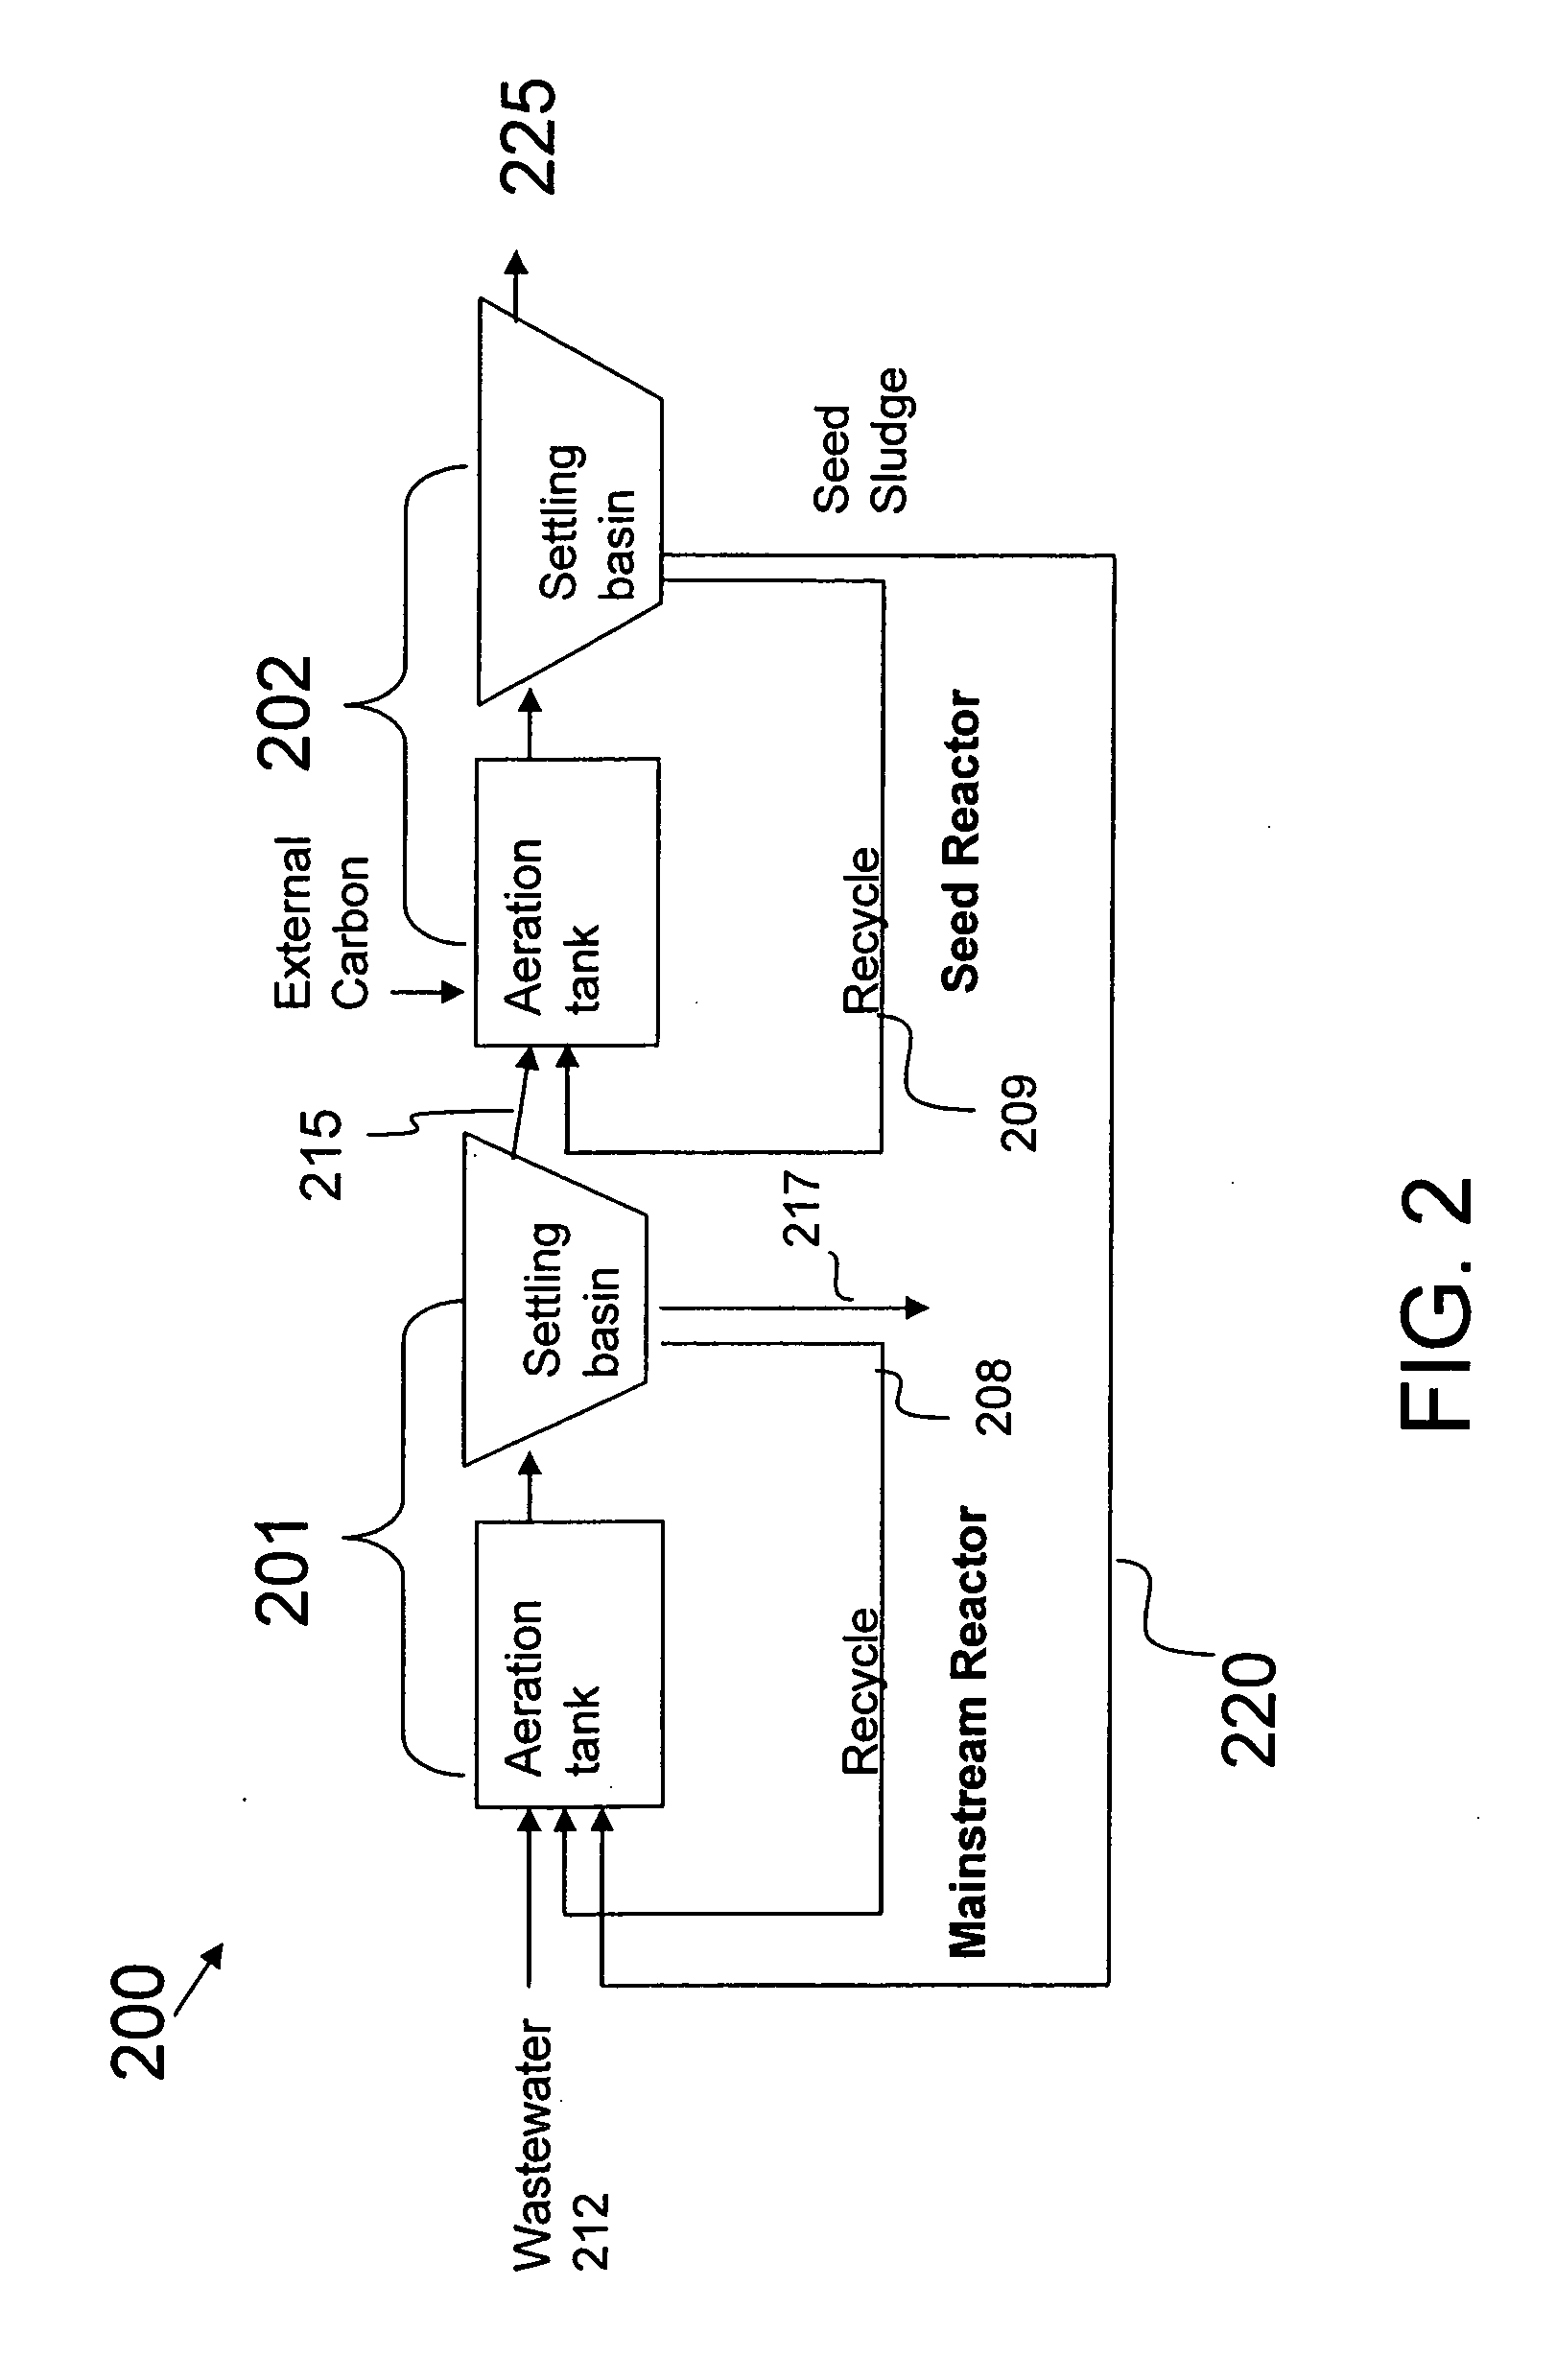 Method and apparatus for nitrogen removal and treatment of digester reject water in wastewater using bioaugmentation